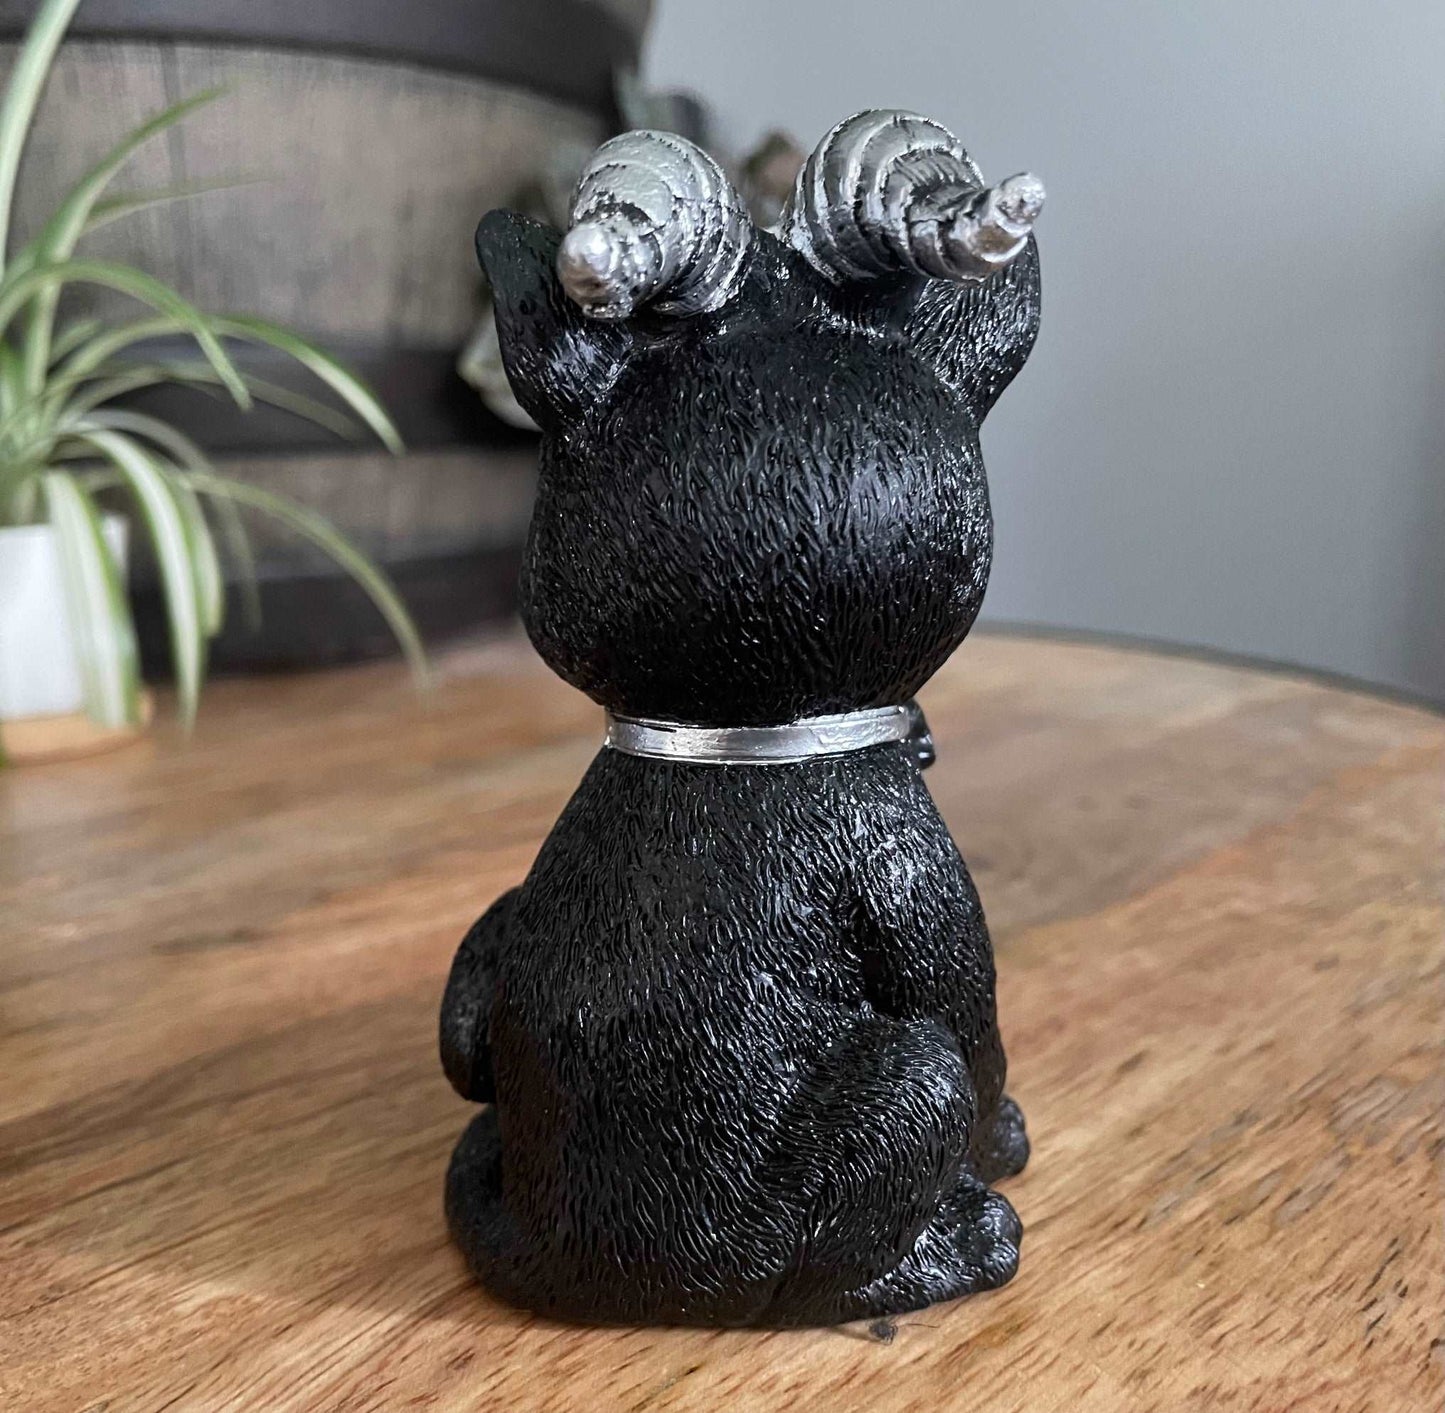 Pictured is a resin statue of a black cat with horns and a pentagram on its forehead with a paw on a silver skull. Demon Cat Figurine back